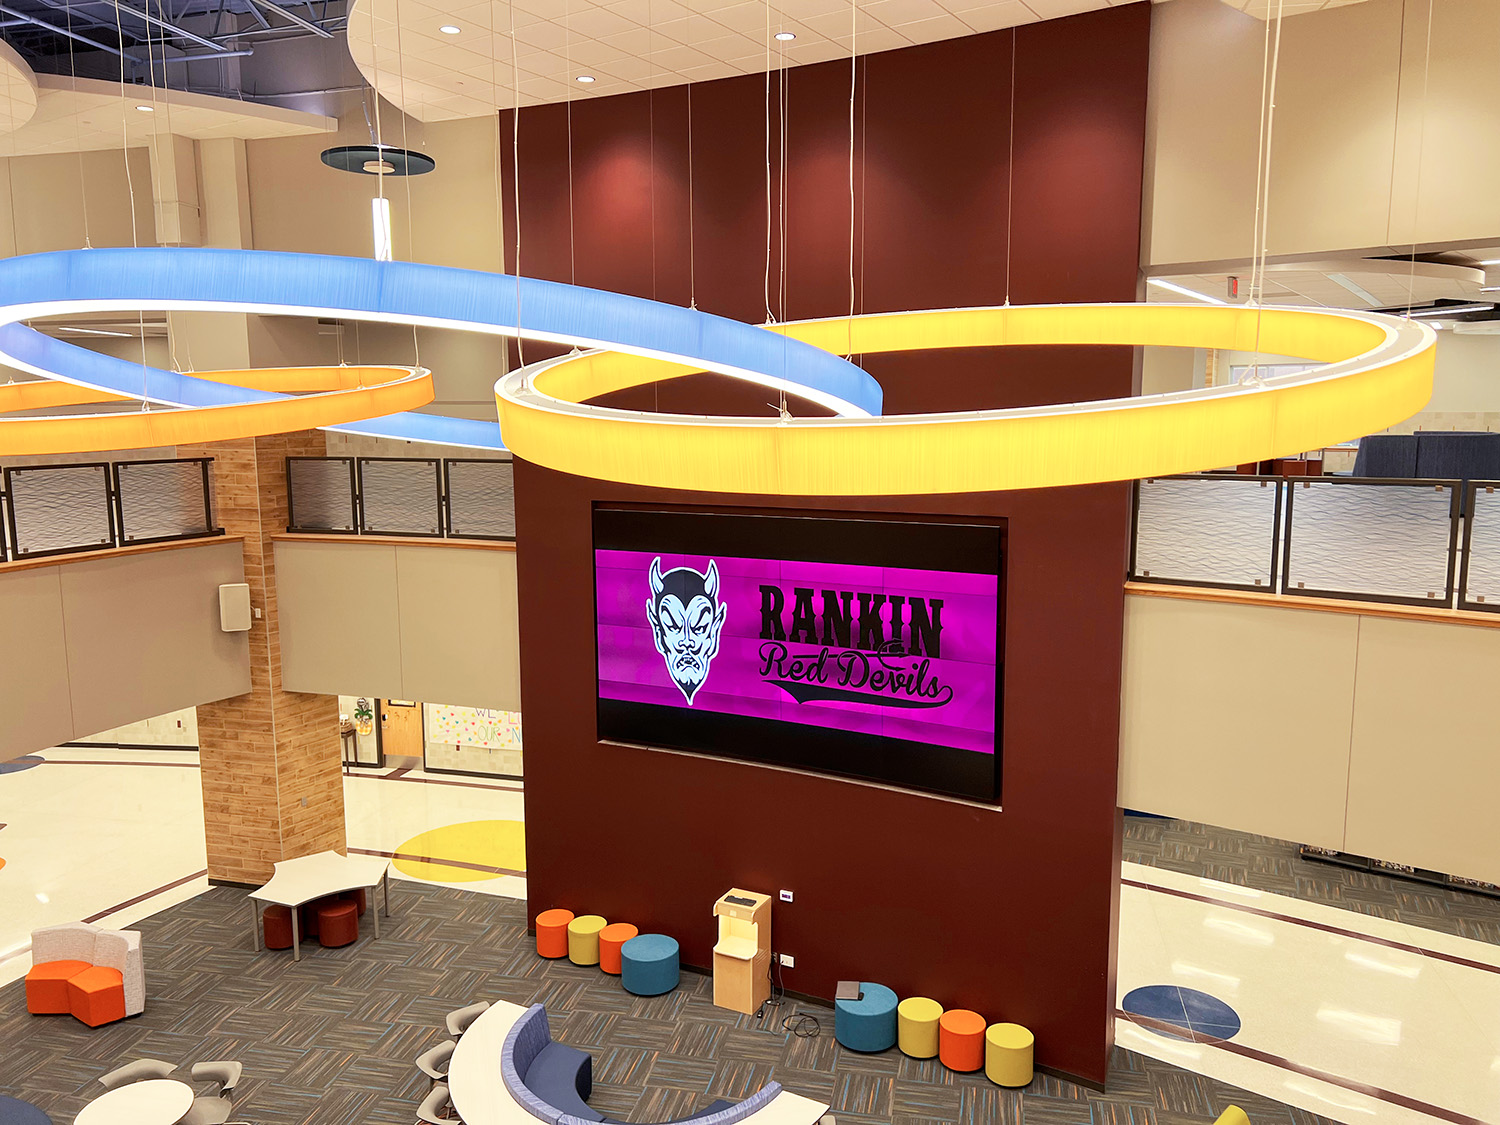 Videowall provides messaging viewable from vantage points throughout the two-story atrium.